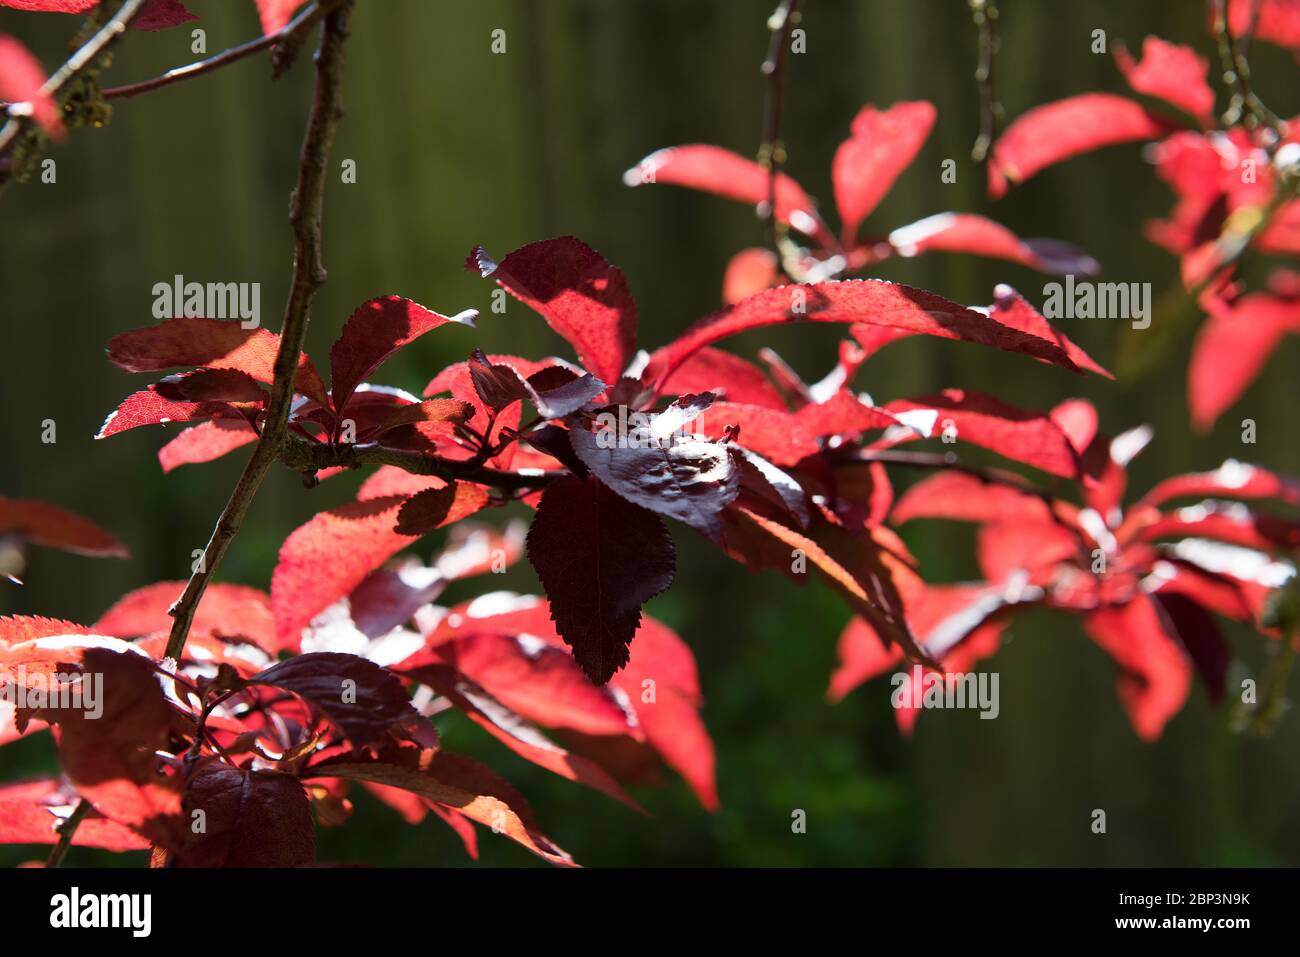 leaves of the flowering cherry tree in an Oxford Garden Stock Photo